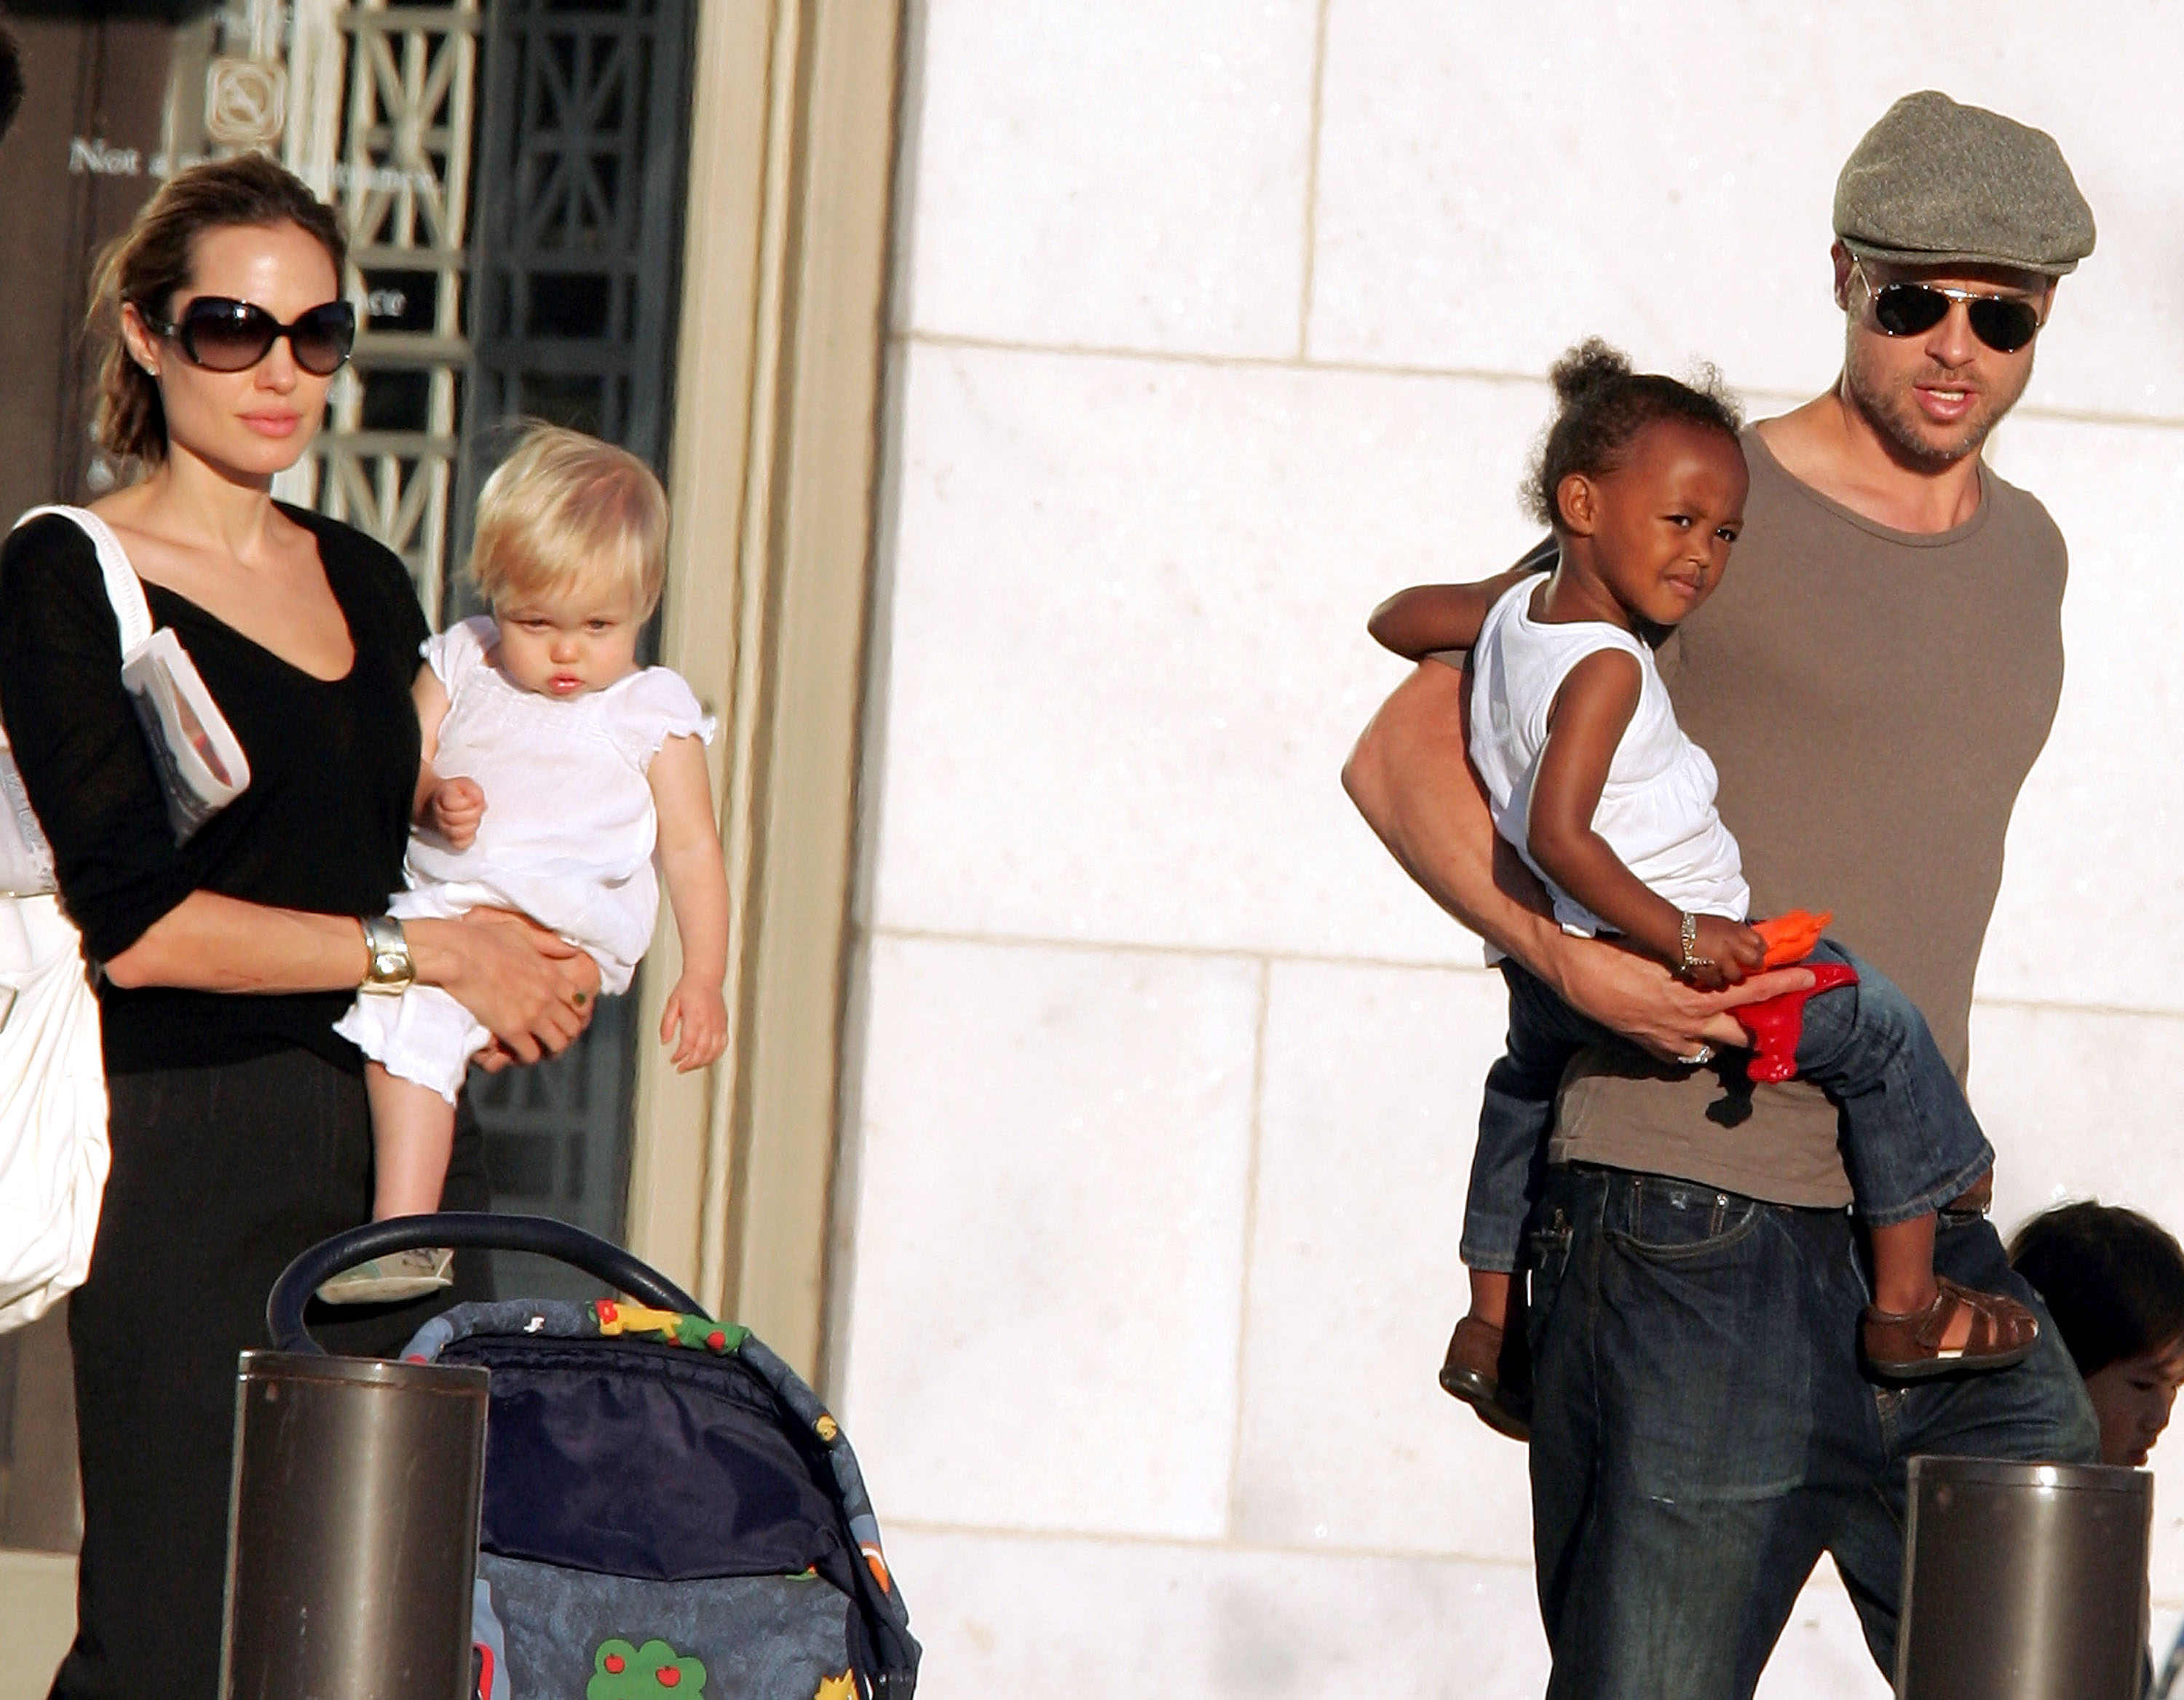 Angelina Jolie, Maddox Jolie-Pitt, Brad Pitt, and the girl visit The Field Museum in Chicago on August 11, 2007. | Source: Getty Images